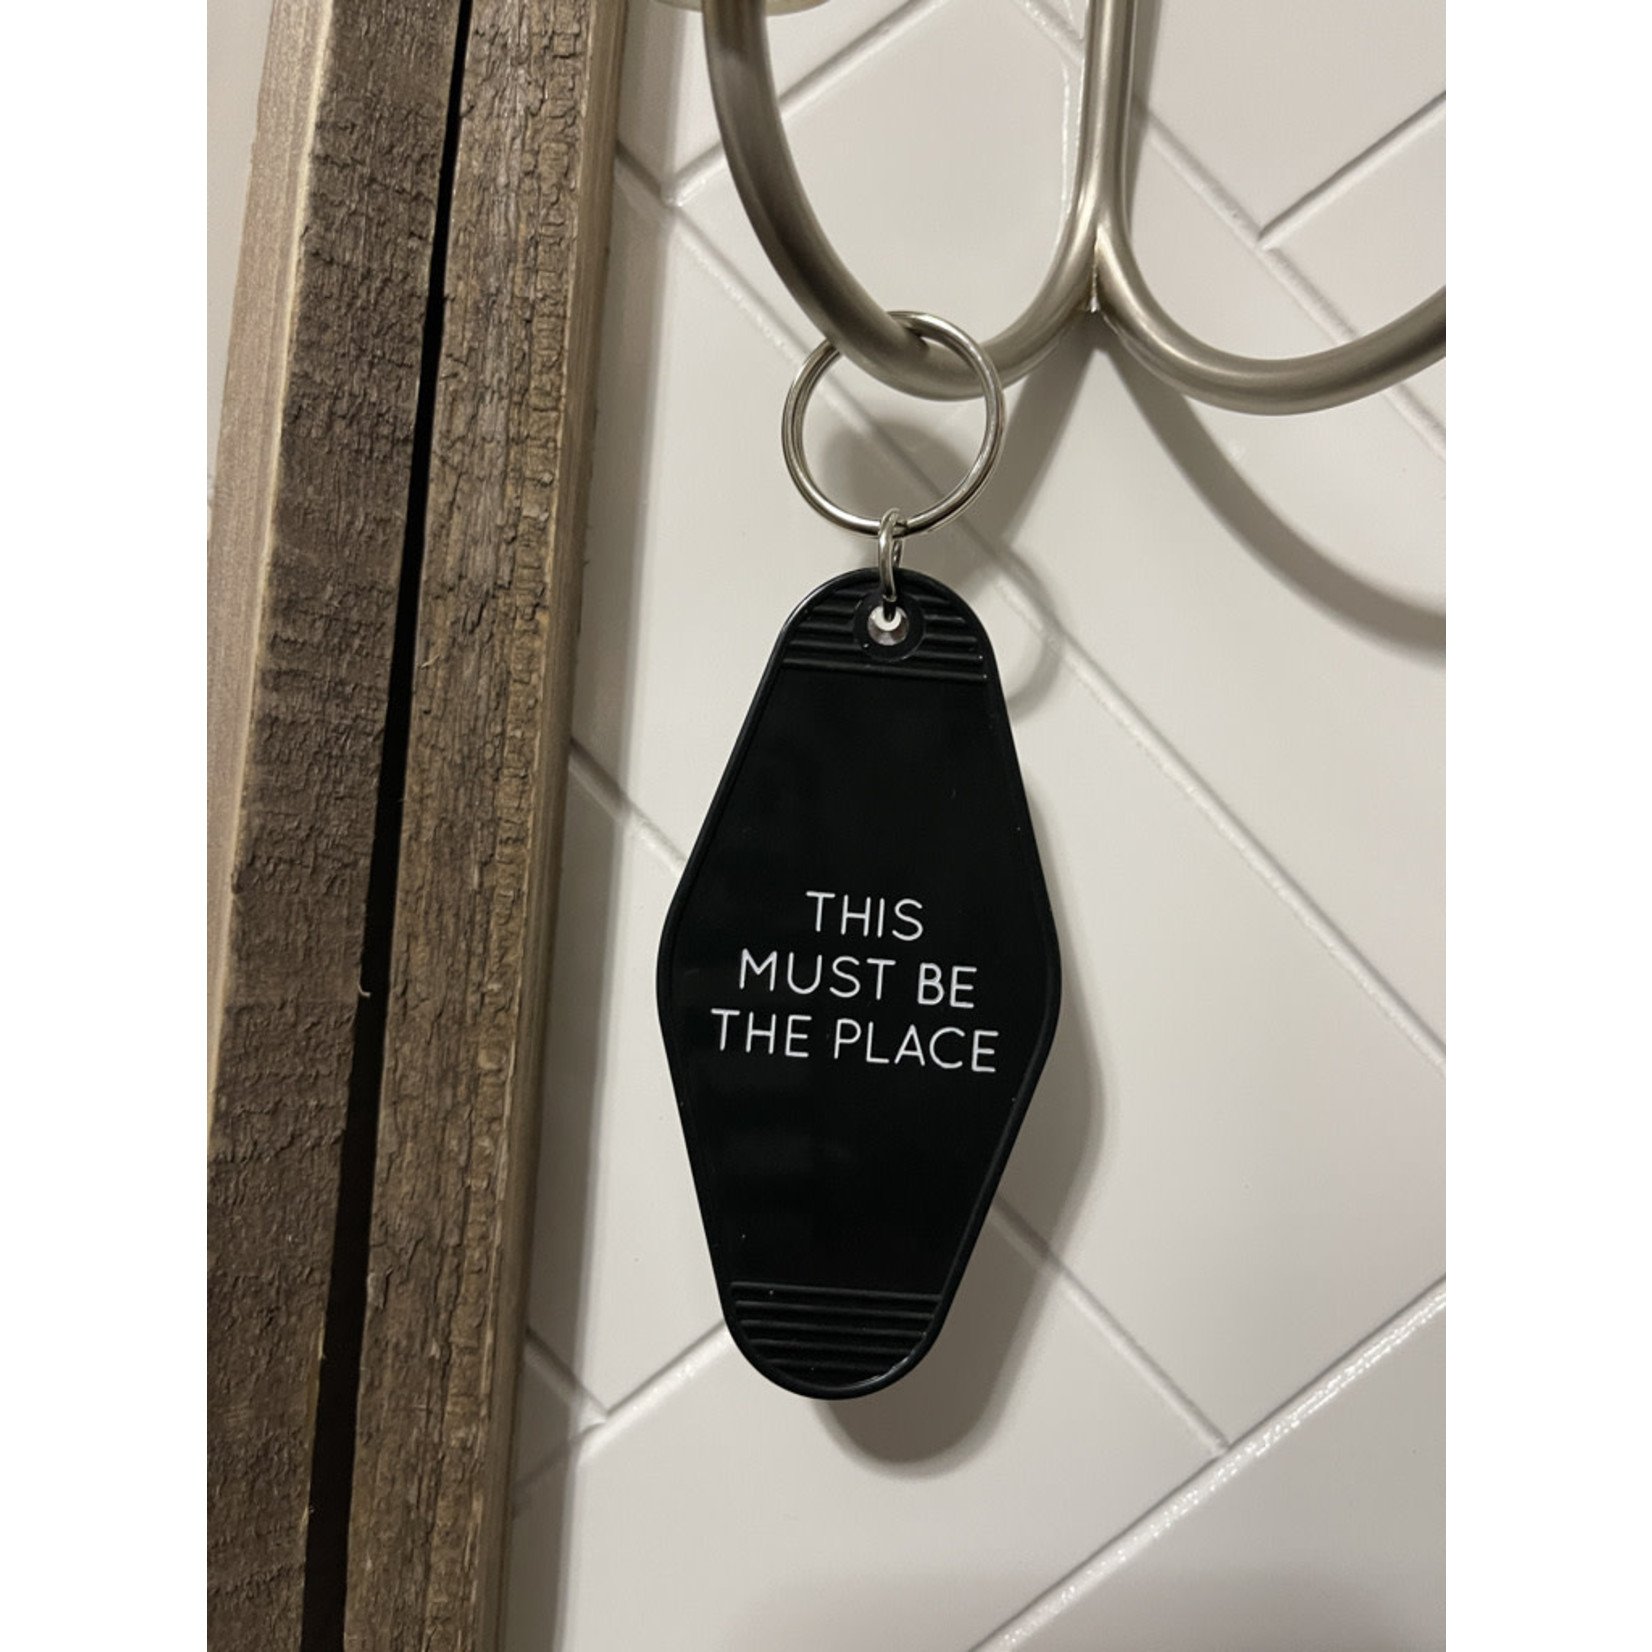 Field Study "This Must Be The Place" Silver / Black Key Chain